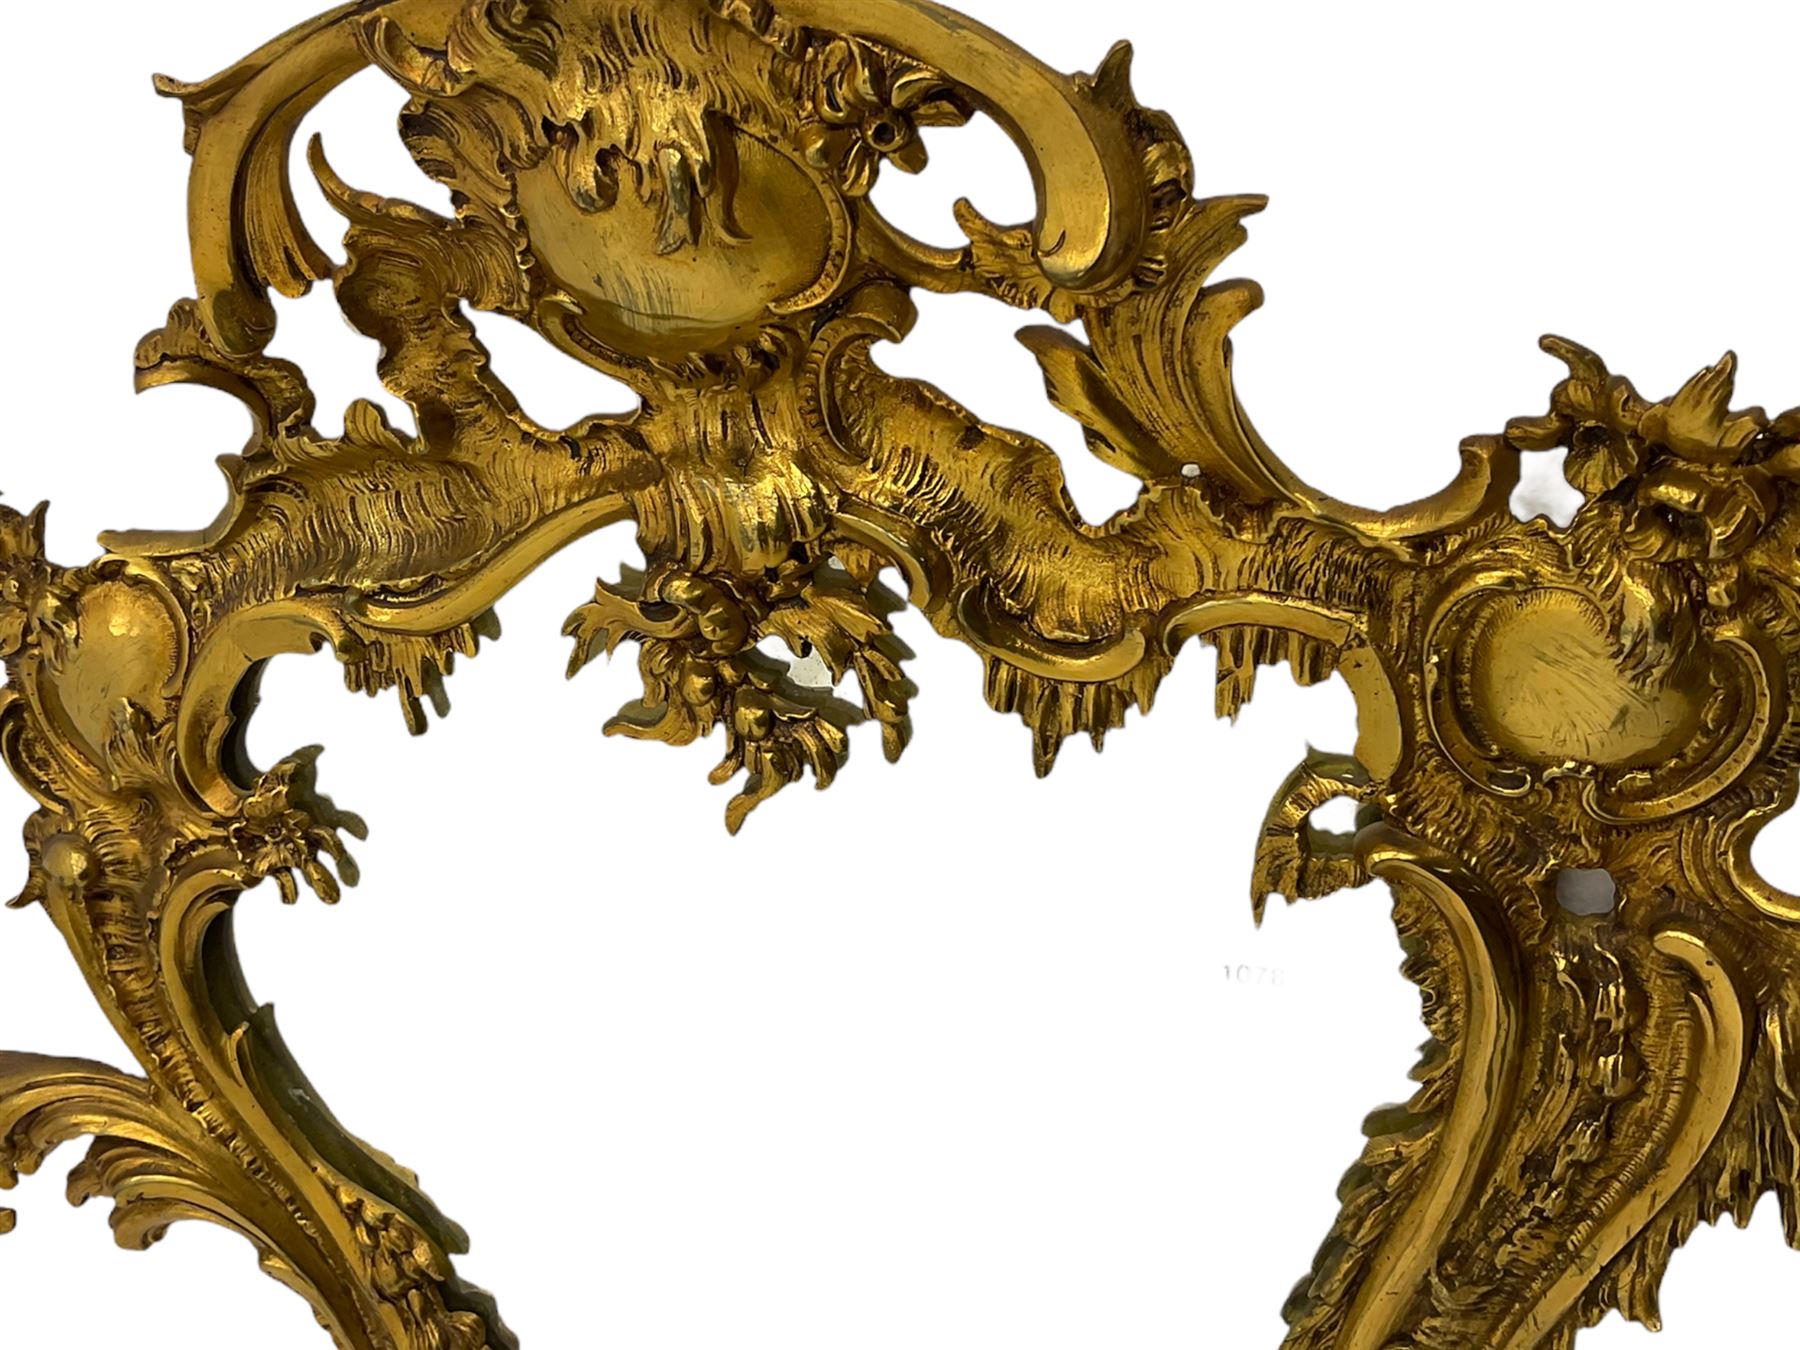 Rococo style ornate cast brass wall mirror - Image 4 of 5